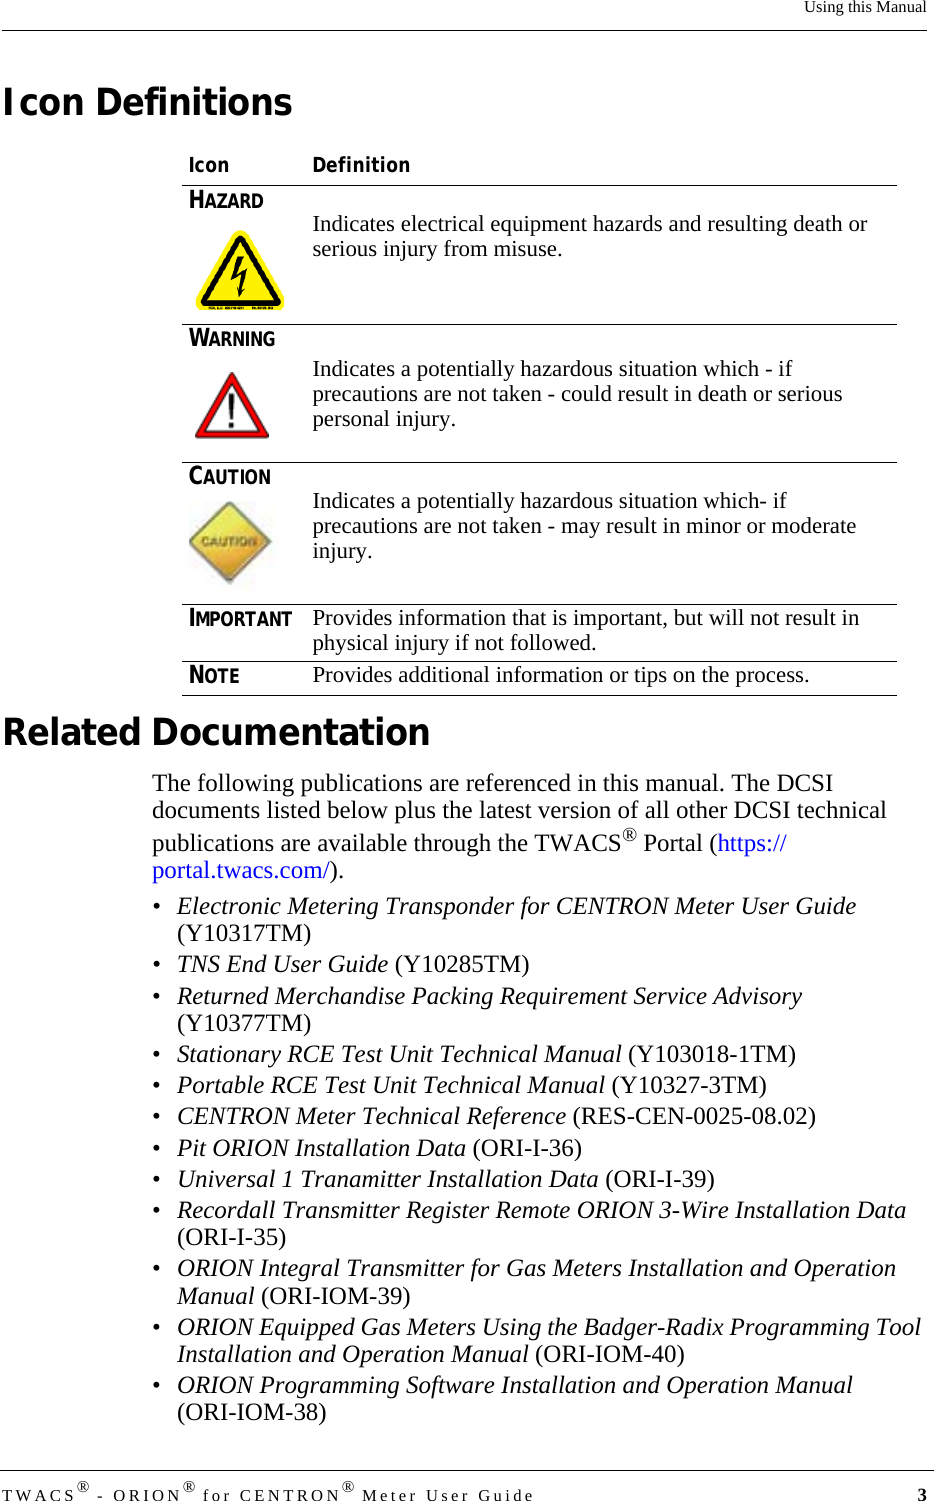 DRAFTTWACS® - ORION® for CENTRON® Meter User Guide 3Using this ManualIcon DefinitionsRelated DocumentationThe following publications are referenced in this manual. The DCSI documents listed below plus the latest version of all other DCSI technical publications are available through the TWACS® Portal (https://portal.twacs.com/).• Electronic Metering Transponder for CENTRON Meter User Guide (Y10317TM)• TNS End User Guide (Y10285TM)•Returned Merchandise Packing Requirement Service Advisory (Y10377TM)•Stationary RCE Test Unit Technical Manual (Y103018-1TM) •Portable RCE Test Unit Technical Manual (Y10327-3TM)•CENTRON Meter Technical Reference (RES-CEN-0025-08.02)•Pit ORION Installation Data (ORI-I-36)•Universal 1 Tranamitter Installation Data (ORI-I-39)•Recordall Transmitter Register Remote ORION 3-Wire Installation Data (ORI-I-35)•ORION Integral Transmitter for Gas Meters Installation and Operation Manual (ORI-IOM-39)•ORION Equipped Gas Meters Using the Badger-Radix Programming Tool Installation and Operation Manual (ORI-IOM-40)•ORION Programming Software Installation and Operation Manual (ORI-IOM-38)Icon DefinitionHAZARDIndicates electrical equipment hazards and resulting death or serious injury from misuse.WARNINGIndicates a potentially hazardous situation which - if precautions are not taken - could result in death or serious personal injury.CAUTIONIndicates a potentially hazardous situation which- if precautions are not taken - may result in minor or moderate injury.IMPORTANTProvides information that is important, but will not result in physical injury if not followed.NOTEProvides additional information or tips on the process.